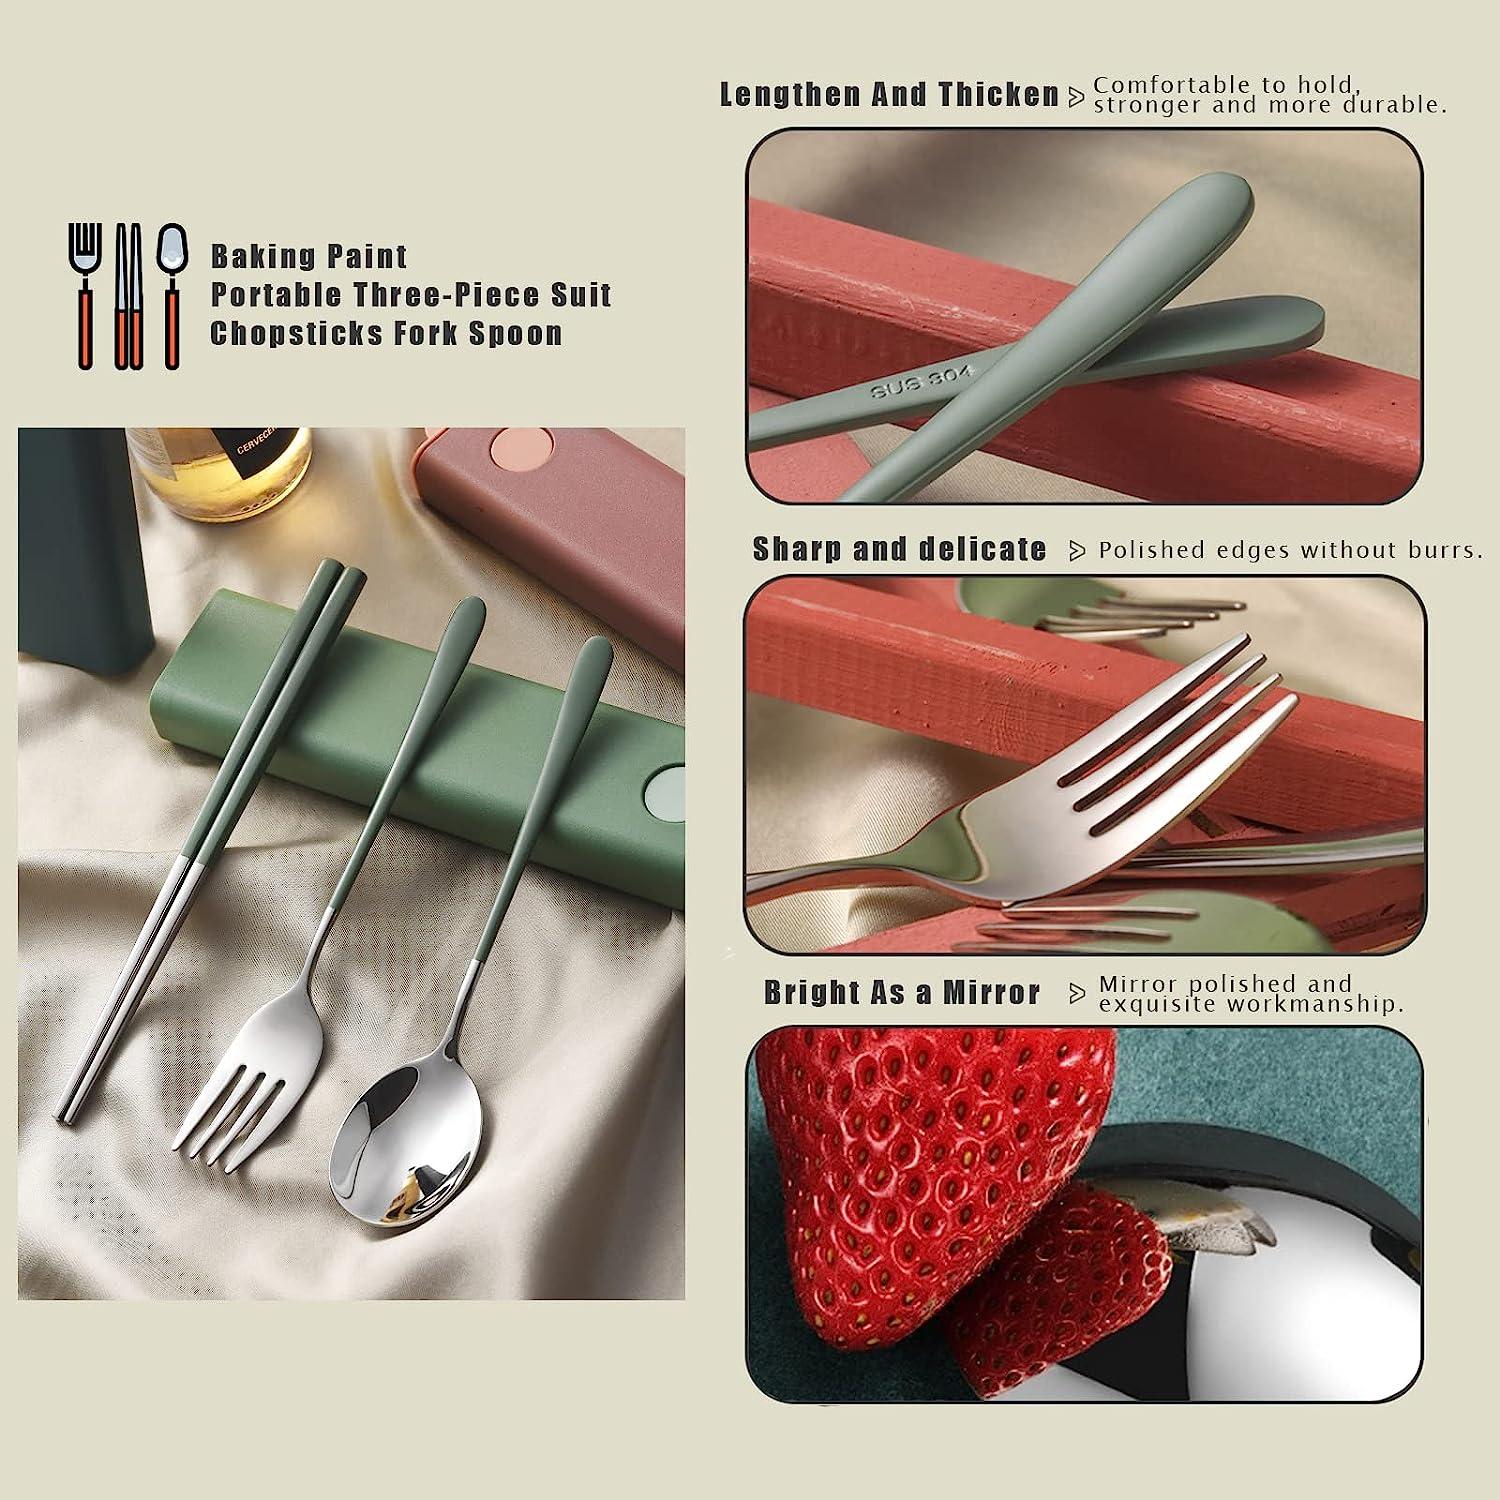 4-piece Portable Stainless Steel Travel Utensils Set with Knife, Fork,  Spoon and Storage Case - Perfect for Office, School, Picnic, Camping and  Outdoor Activities